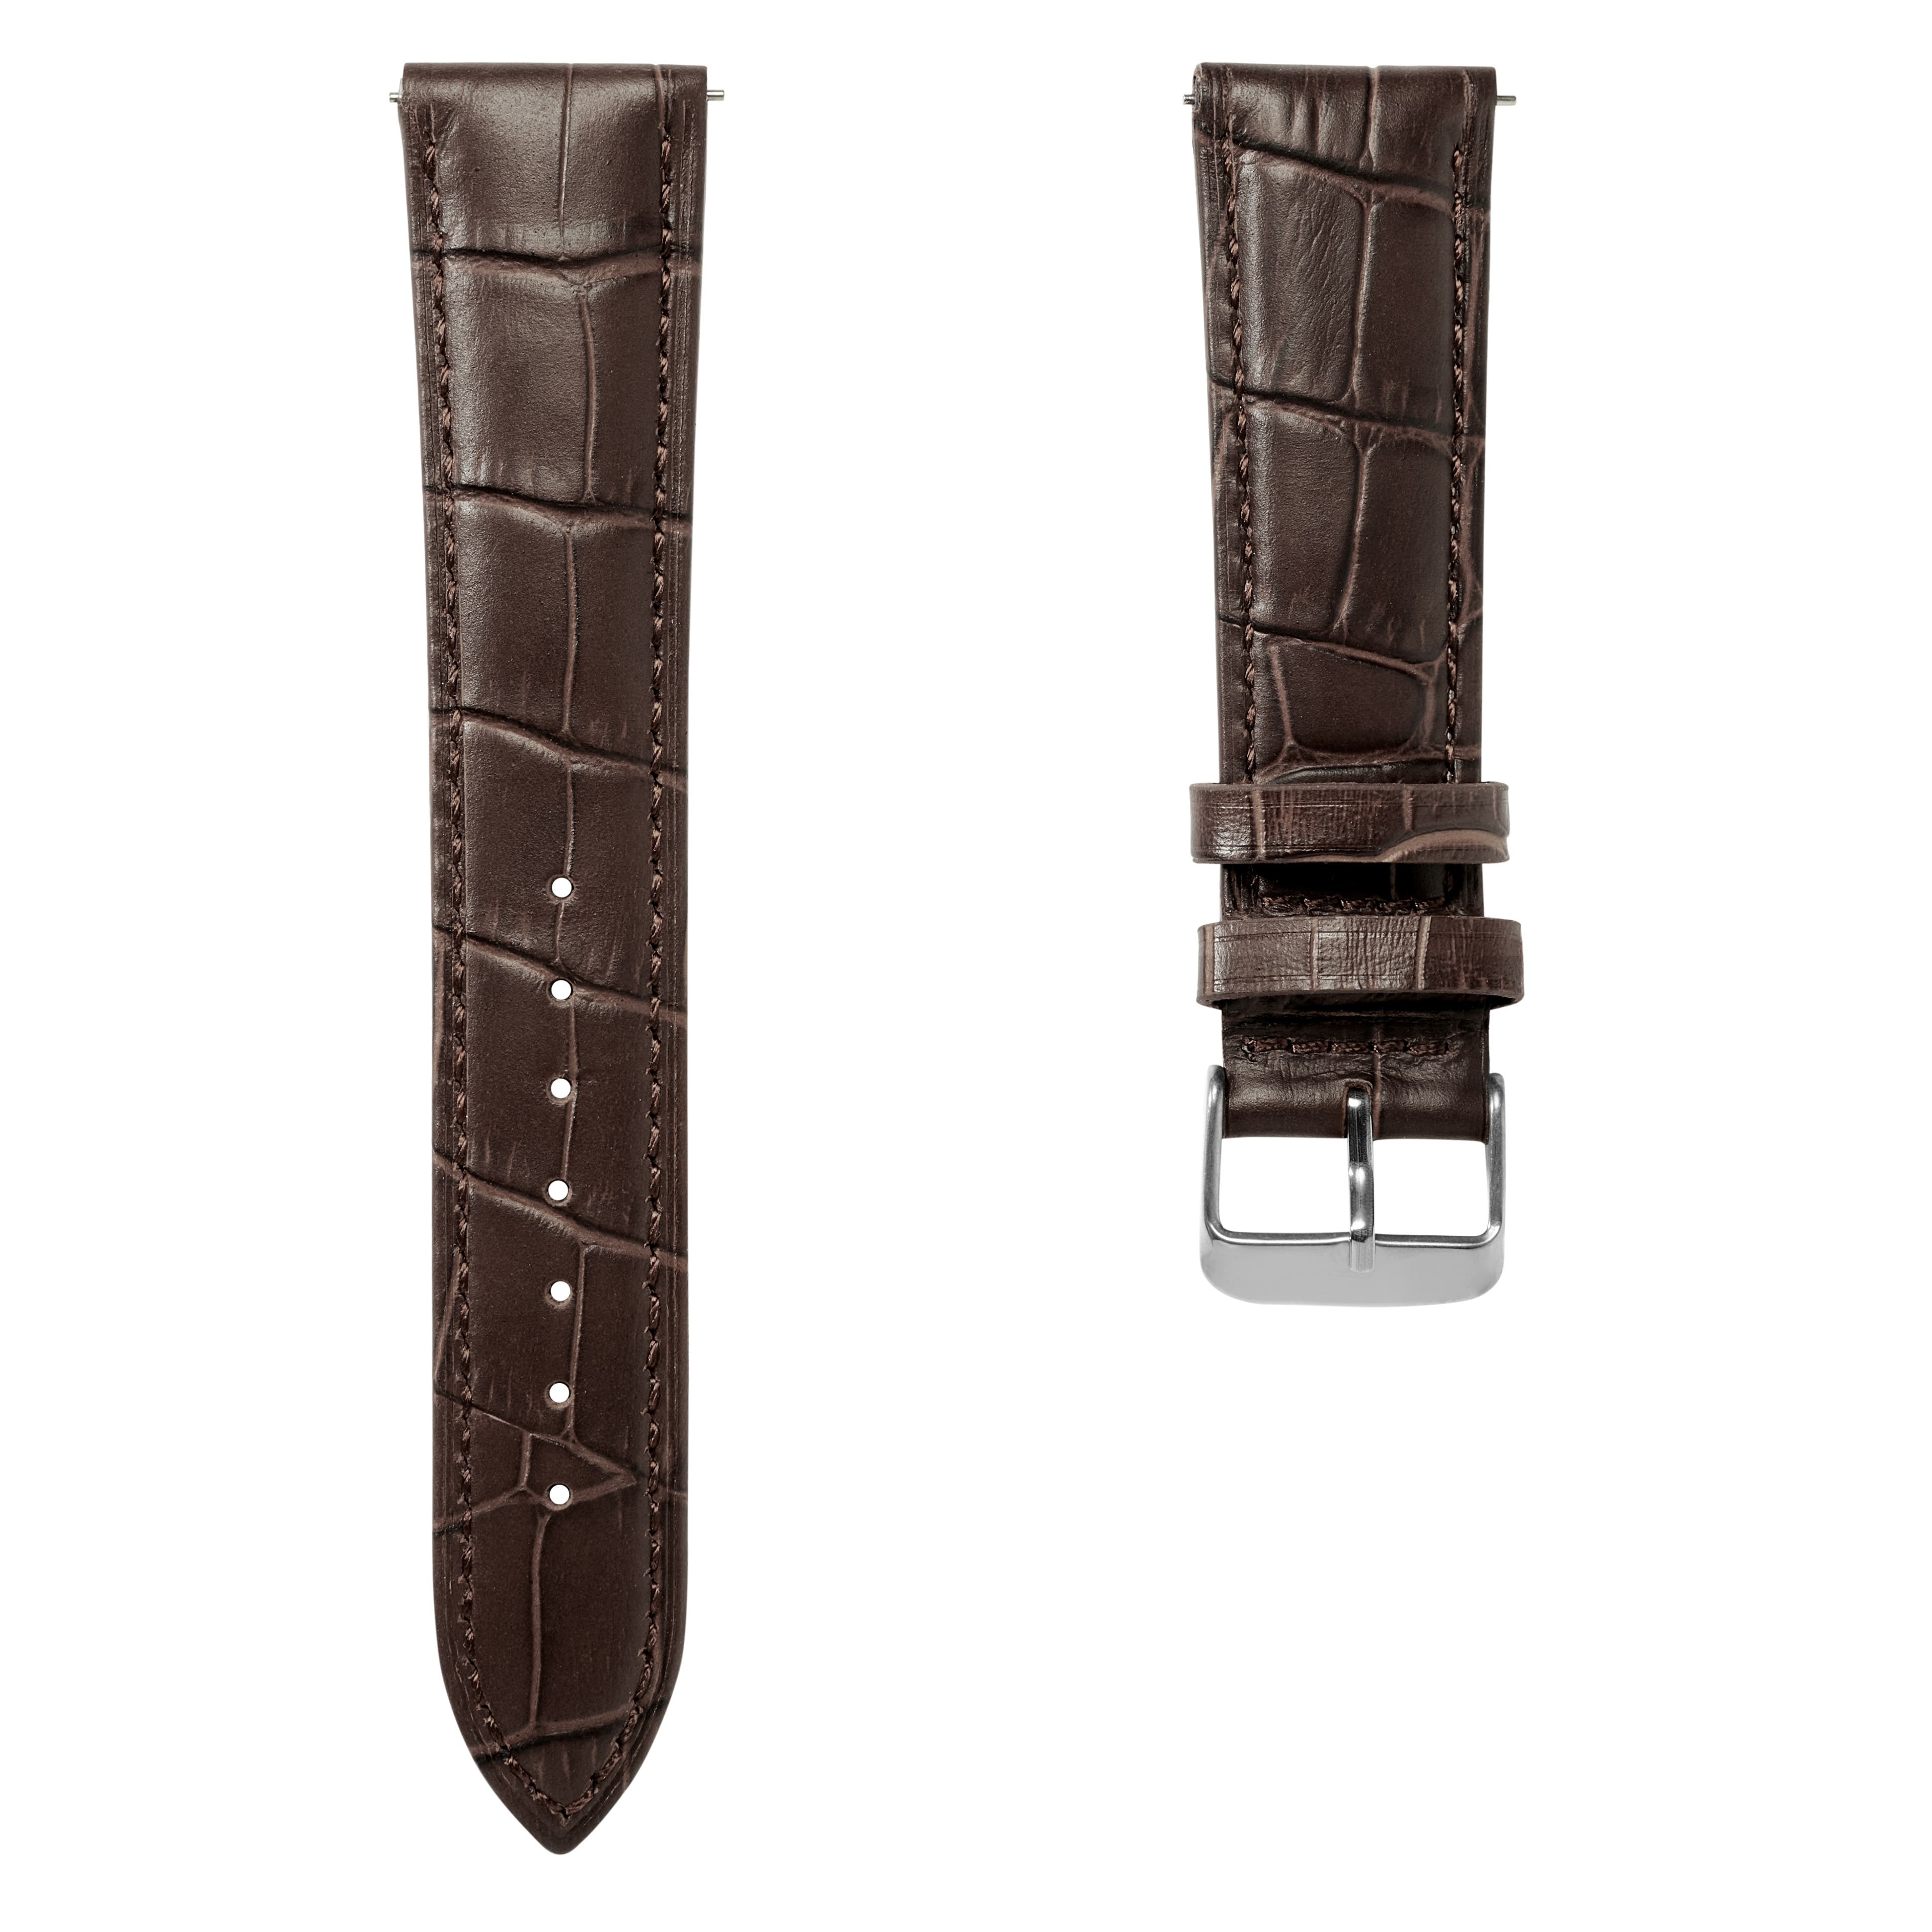 22 mm Crocodile-Embossed Dark-Brown Leather Watch Strap with Silver-Tone Buckle – Quick Release